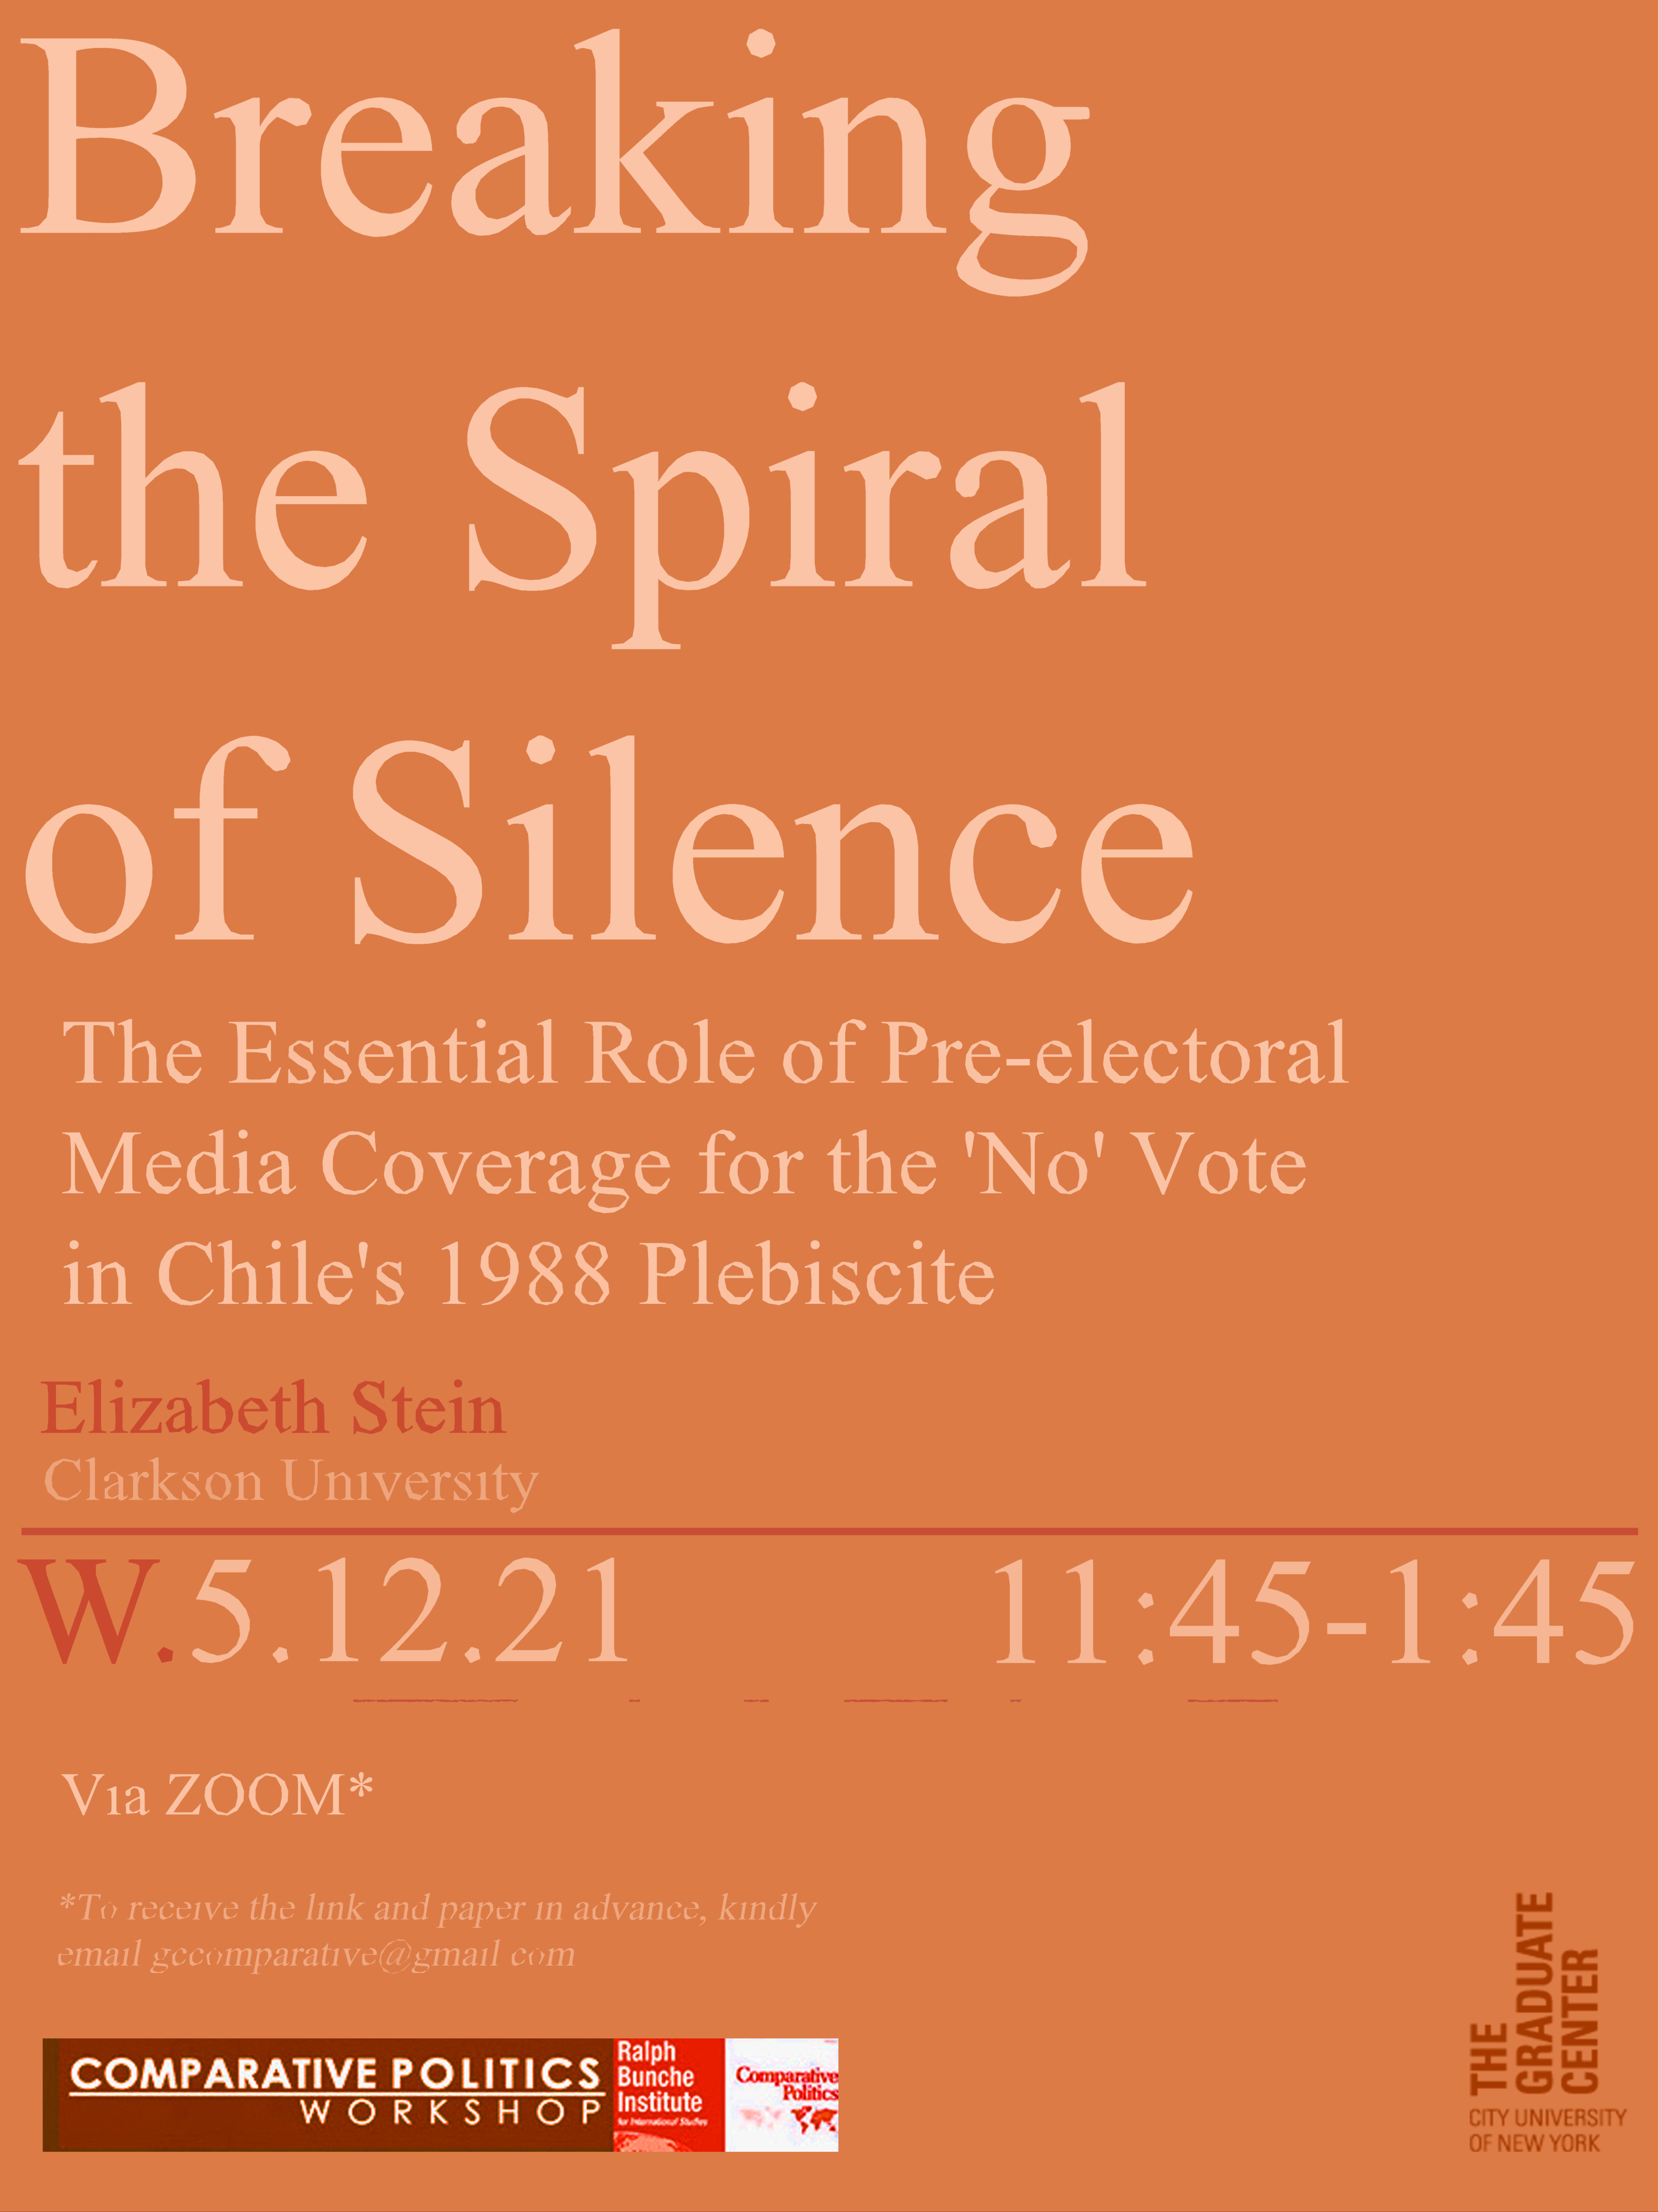 Comparative Politics Workshop: Elizabeth Stein, "Breaking the Spiral of Silence: The Essential Role of Pre-Electoral Media Coverage for the 'No' Vote in Chile's 1988 Plebiscite," Wednesday, May 12, 11:45am-1:45pm EST